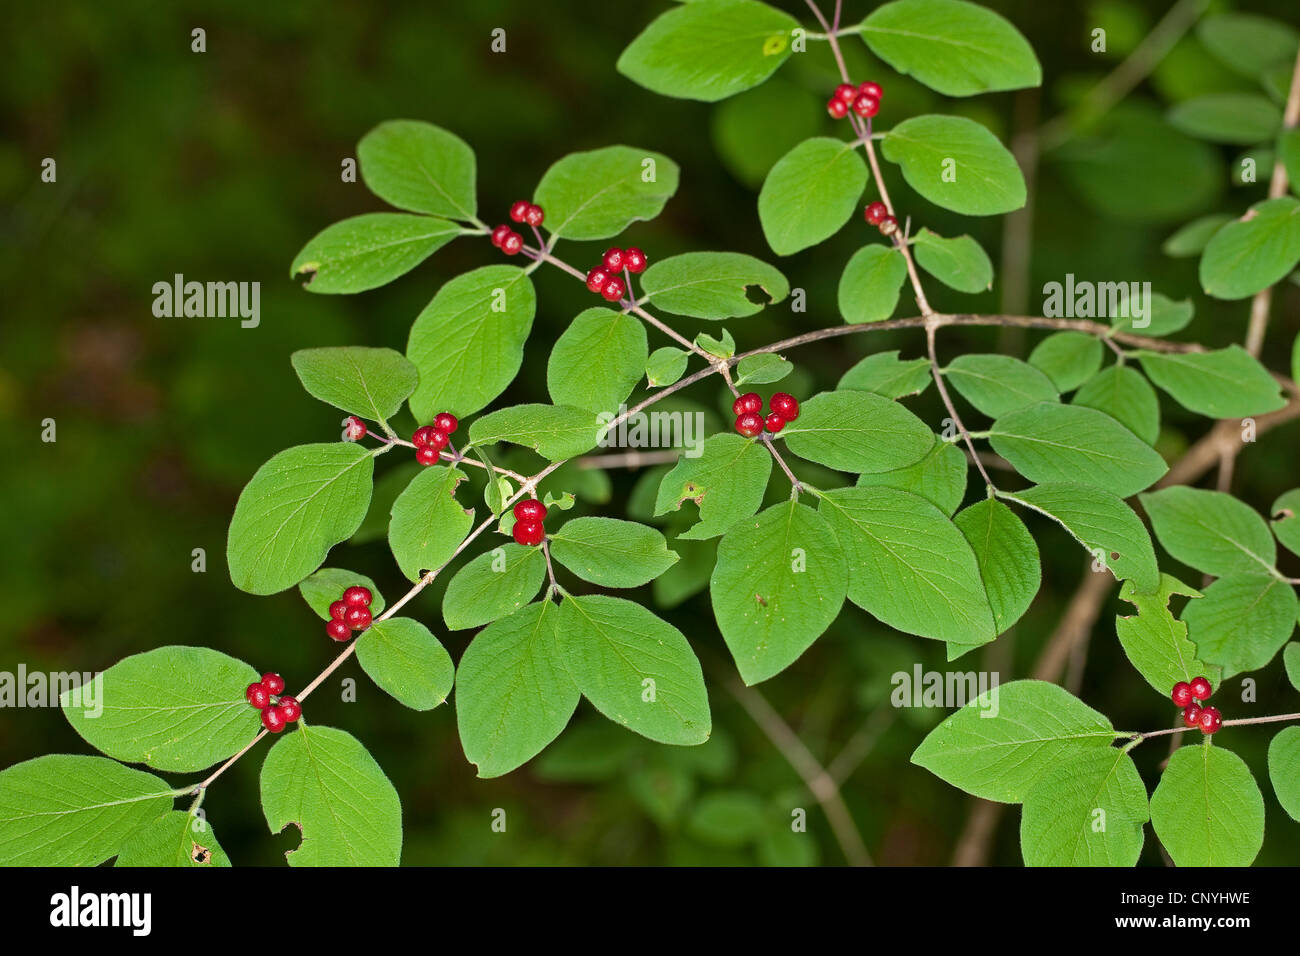 European fly honeysuckle (Lonicera xylosteum), branch with ripe fruits, Germany Stock Photo